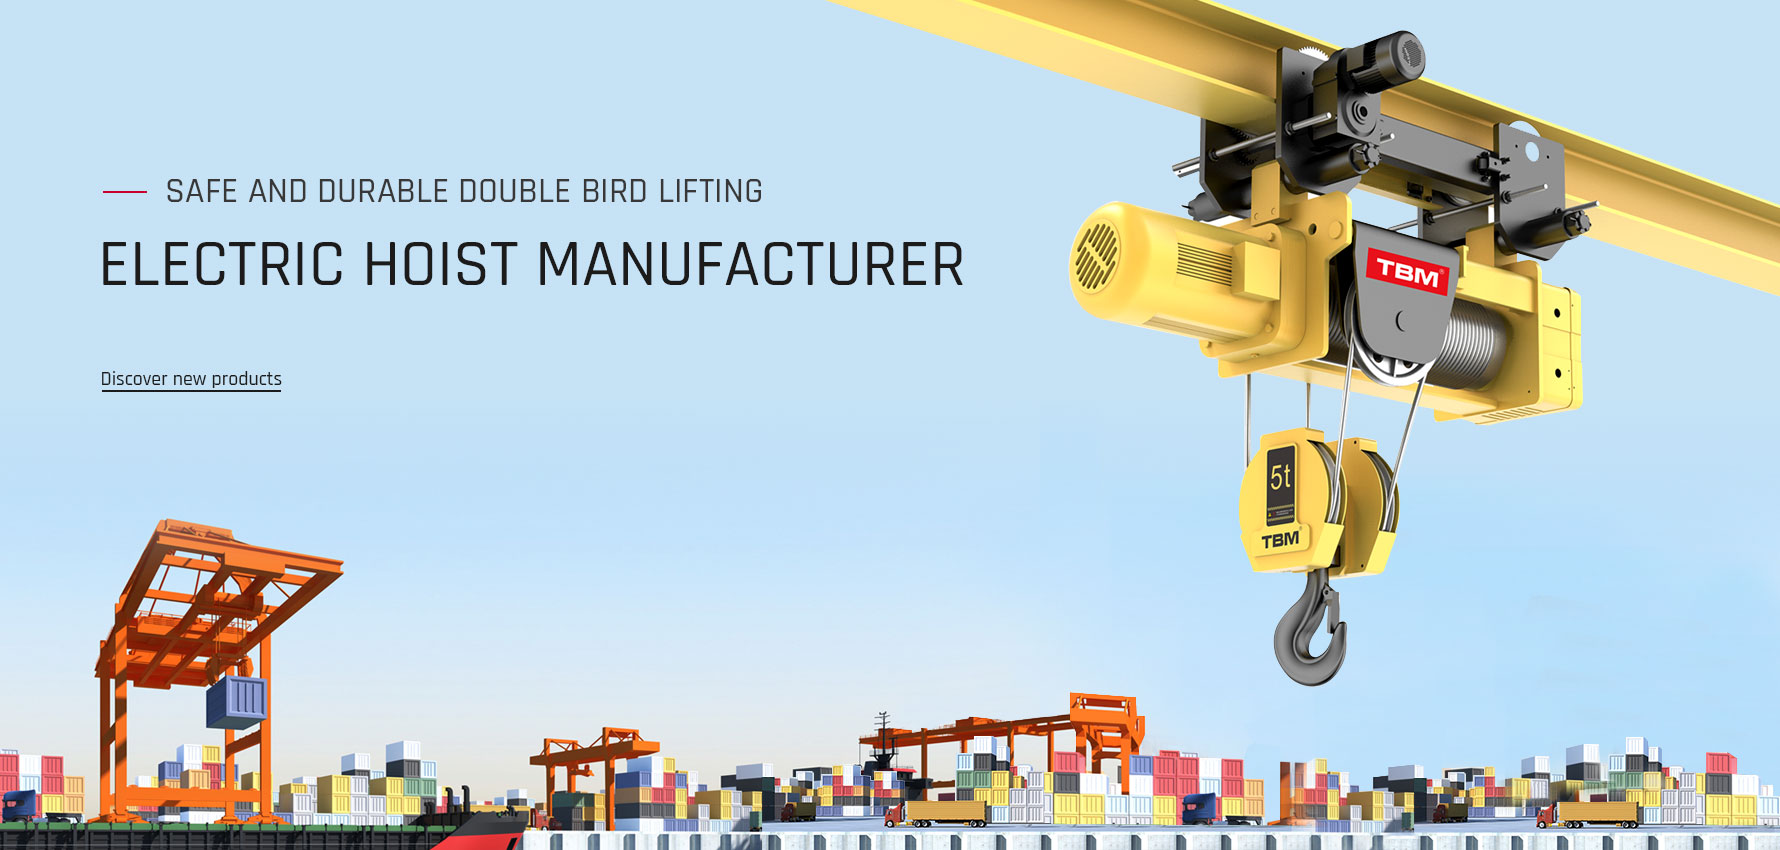 Key Features to Look for in High-Quality Electric Wire Rope Hoists for Industrial Applications